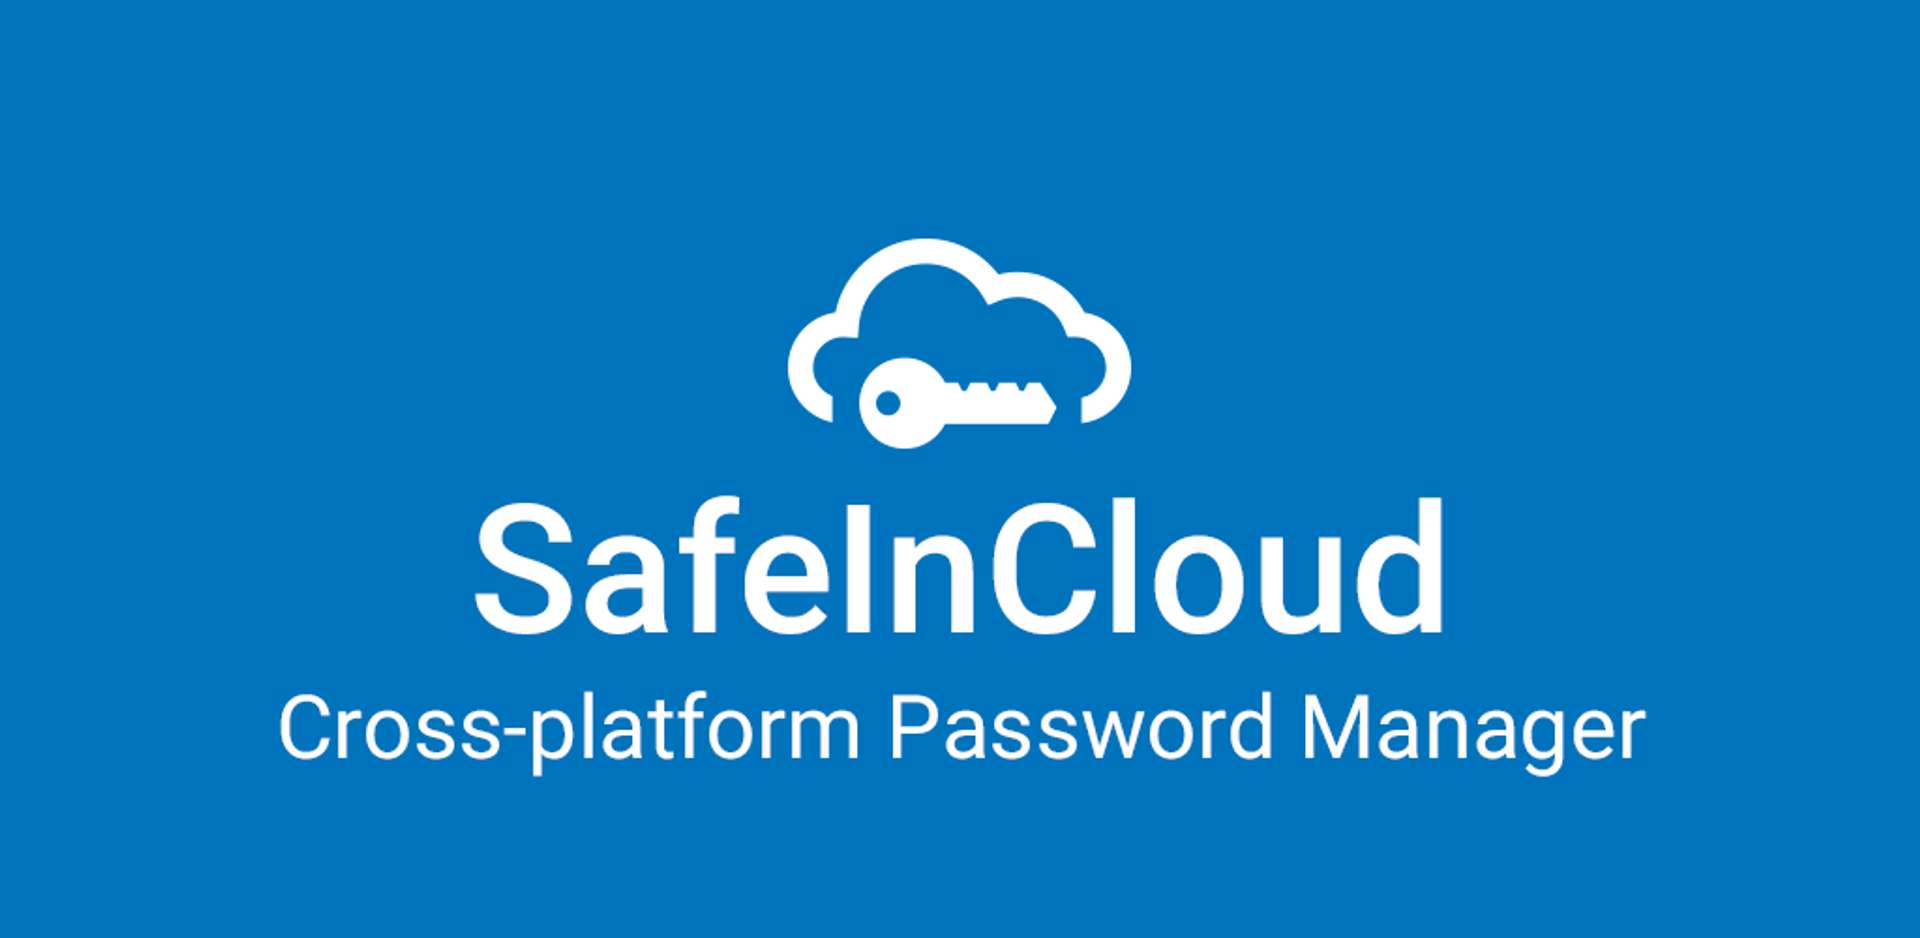 safeincloud work with wd cloud